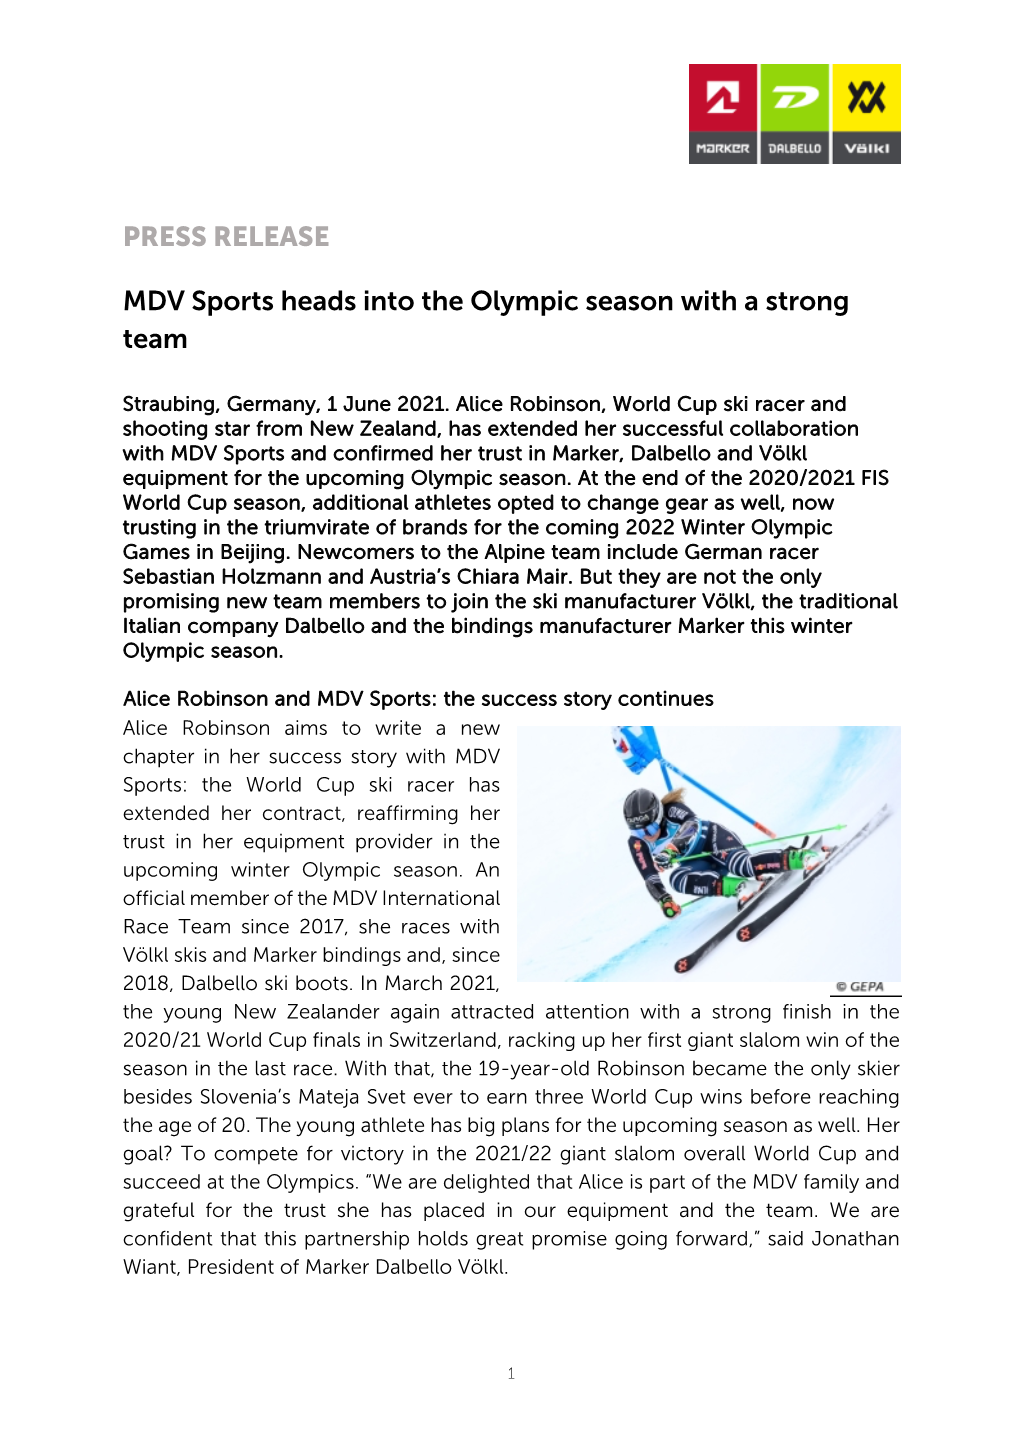 PRESS RELEASE MDV Sports Heads Into the Olympic Season with A